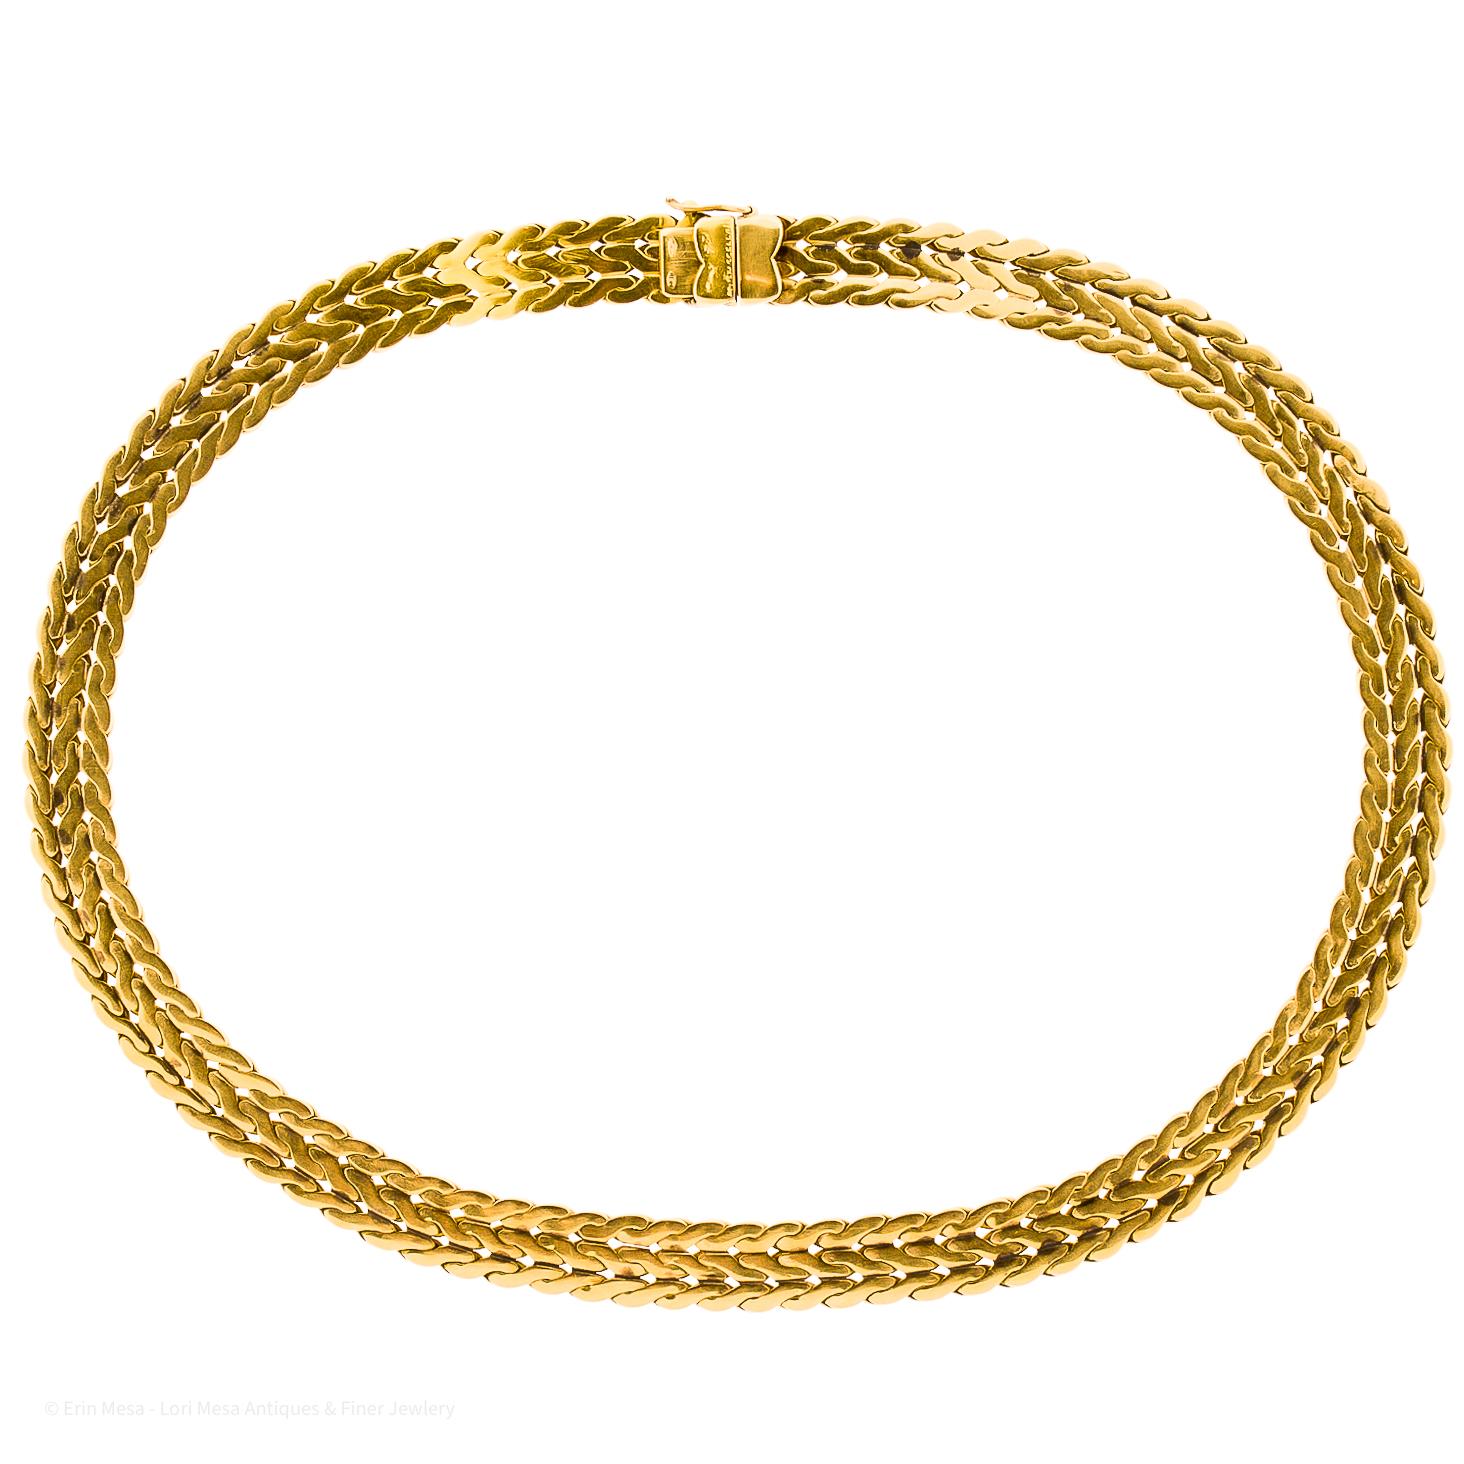 This exquisite vintage Buccellati choker necklace is a true treasure for any jewelry collector. It boasts a beautifully textured braided design that adds a touch of elegance to any outfit. The necklace is crafted with the highest quality materials